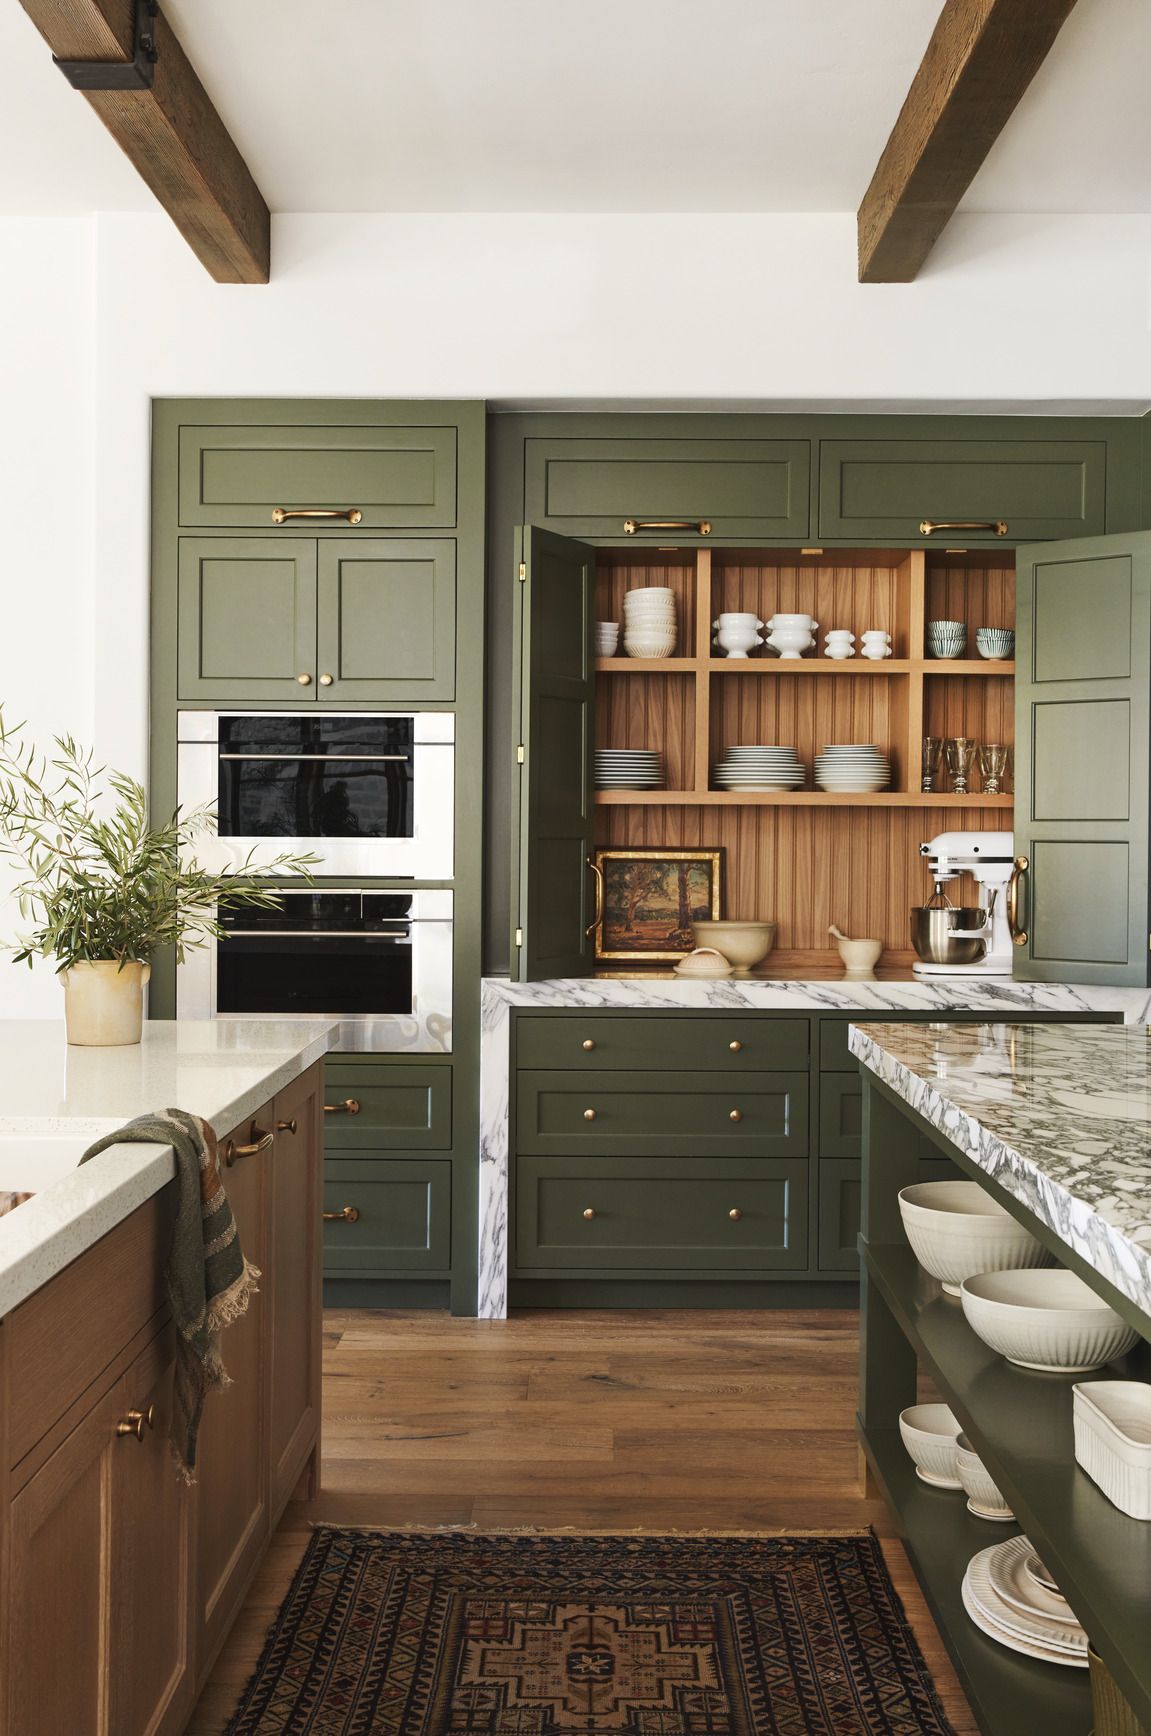 How do I pick the right kitchen color for my lifestyle